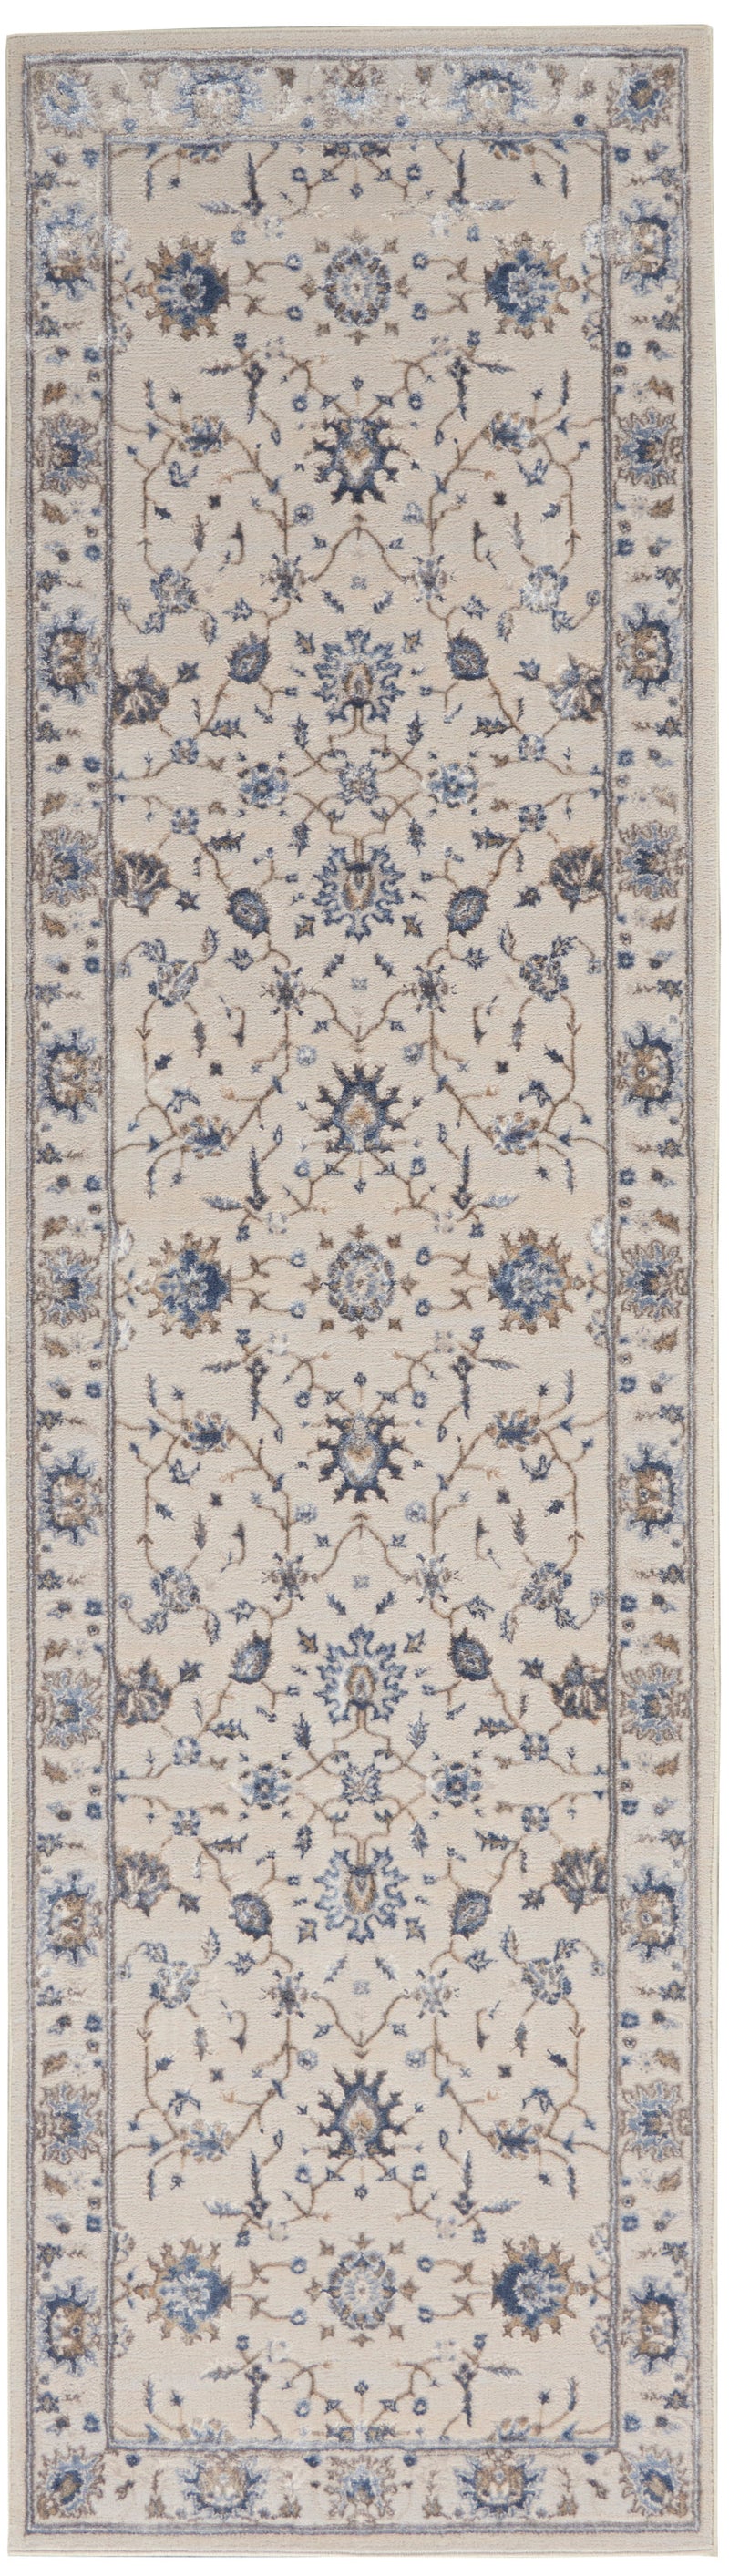 Nourison Silky Textures SLY09 Ivory Indoor Rug